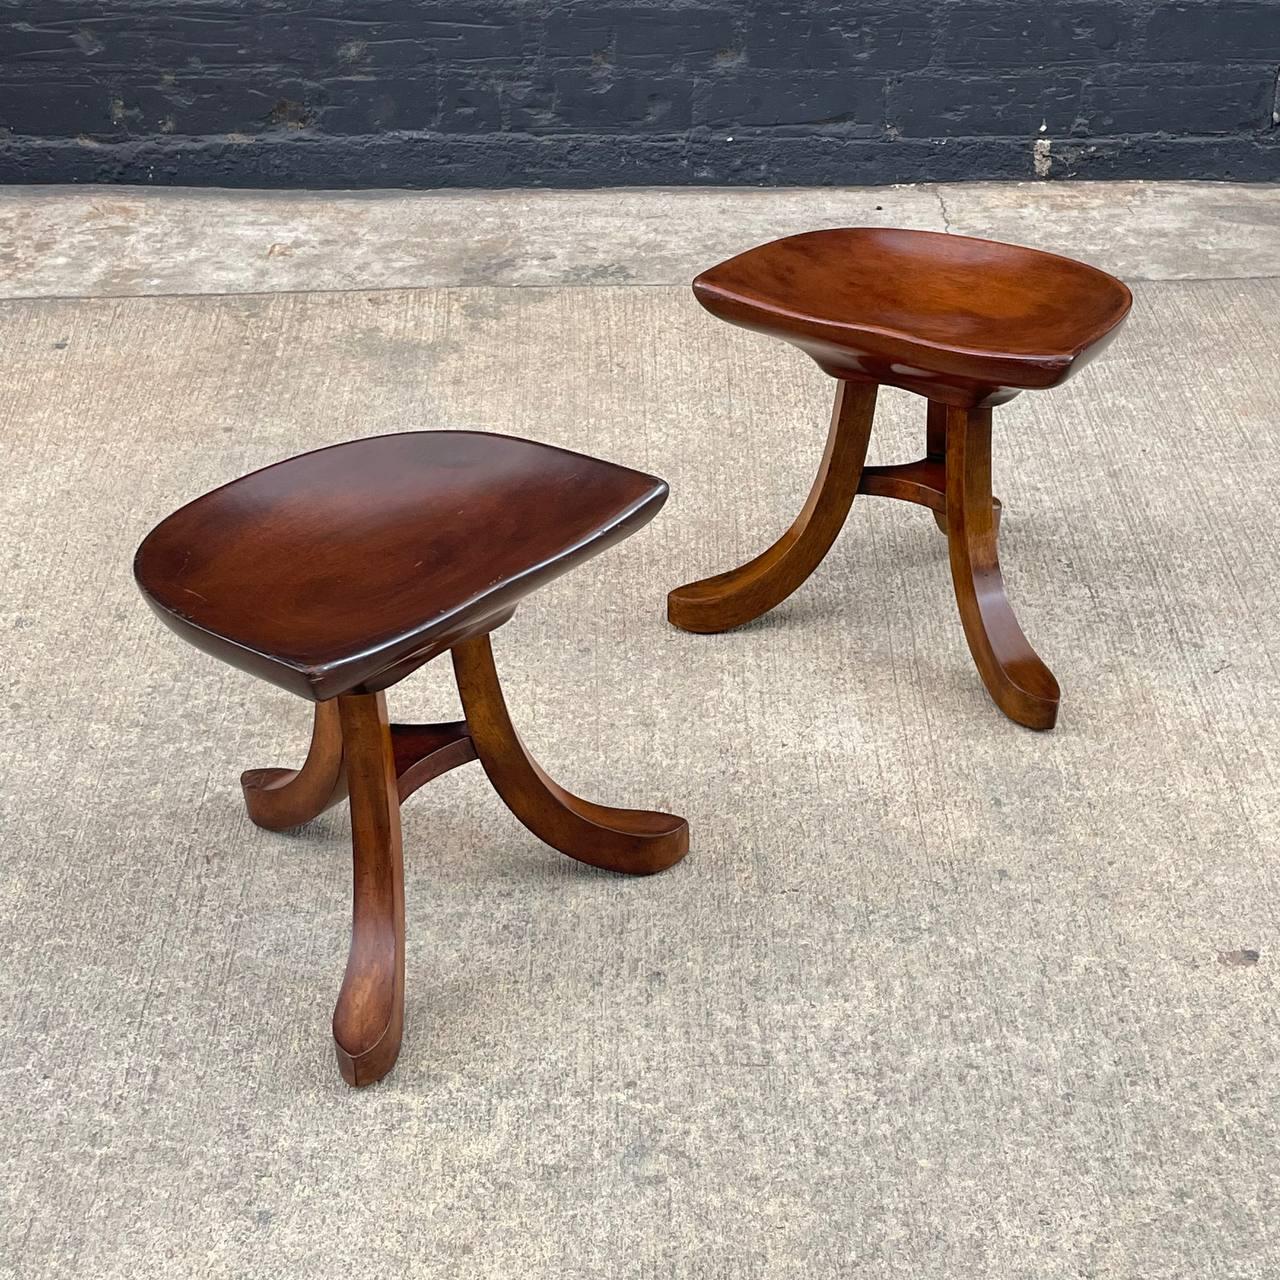 Pair of Vintage Sculpted Mahogany Tripod Stools by Smith & Watson

Country: American
Materials: Mahogany
Maker: Smith & Watson
Style: Antique
Year: 1950s

$1,595 pair 

Dimensions:
14.50”H x 14.50”W x 11.25”D.